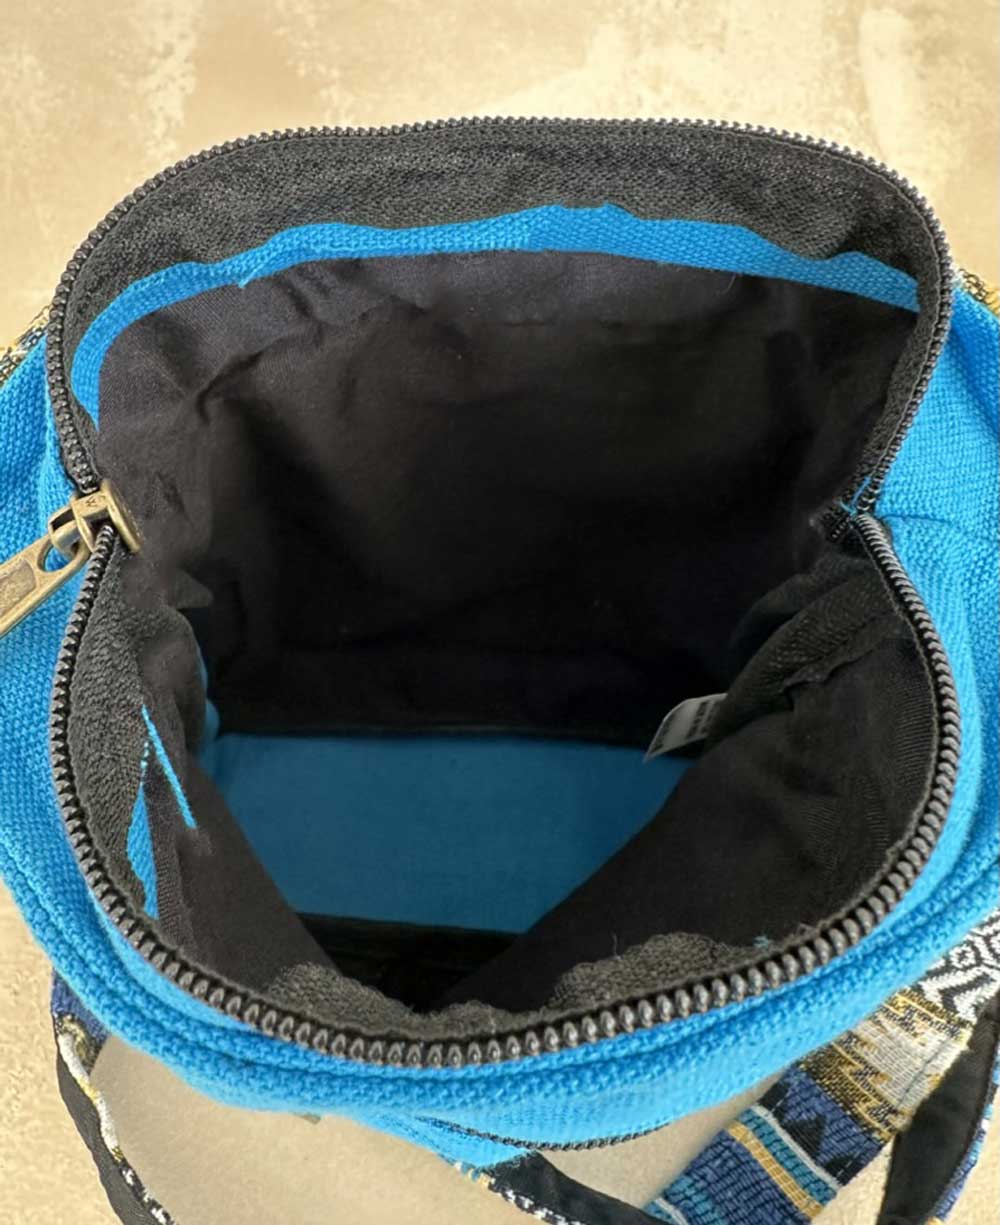 Inside view of the bag